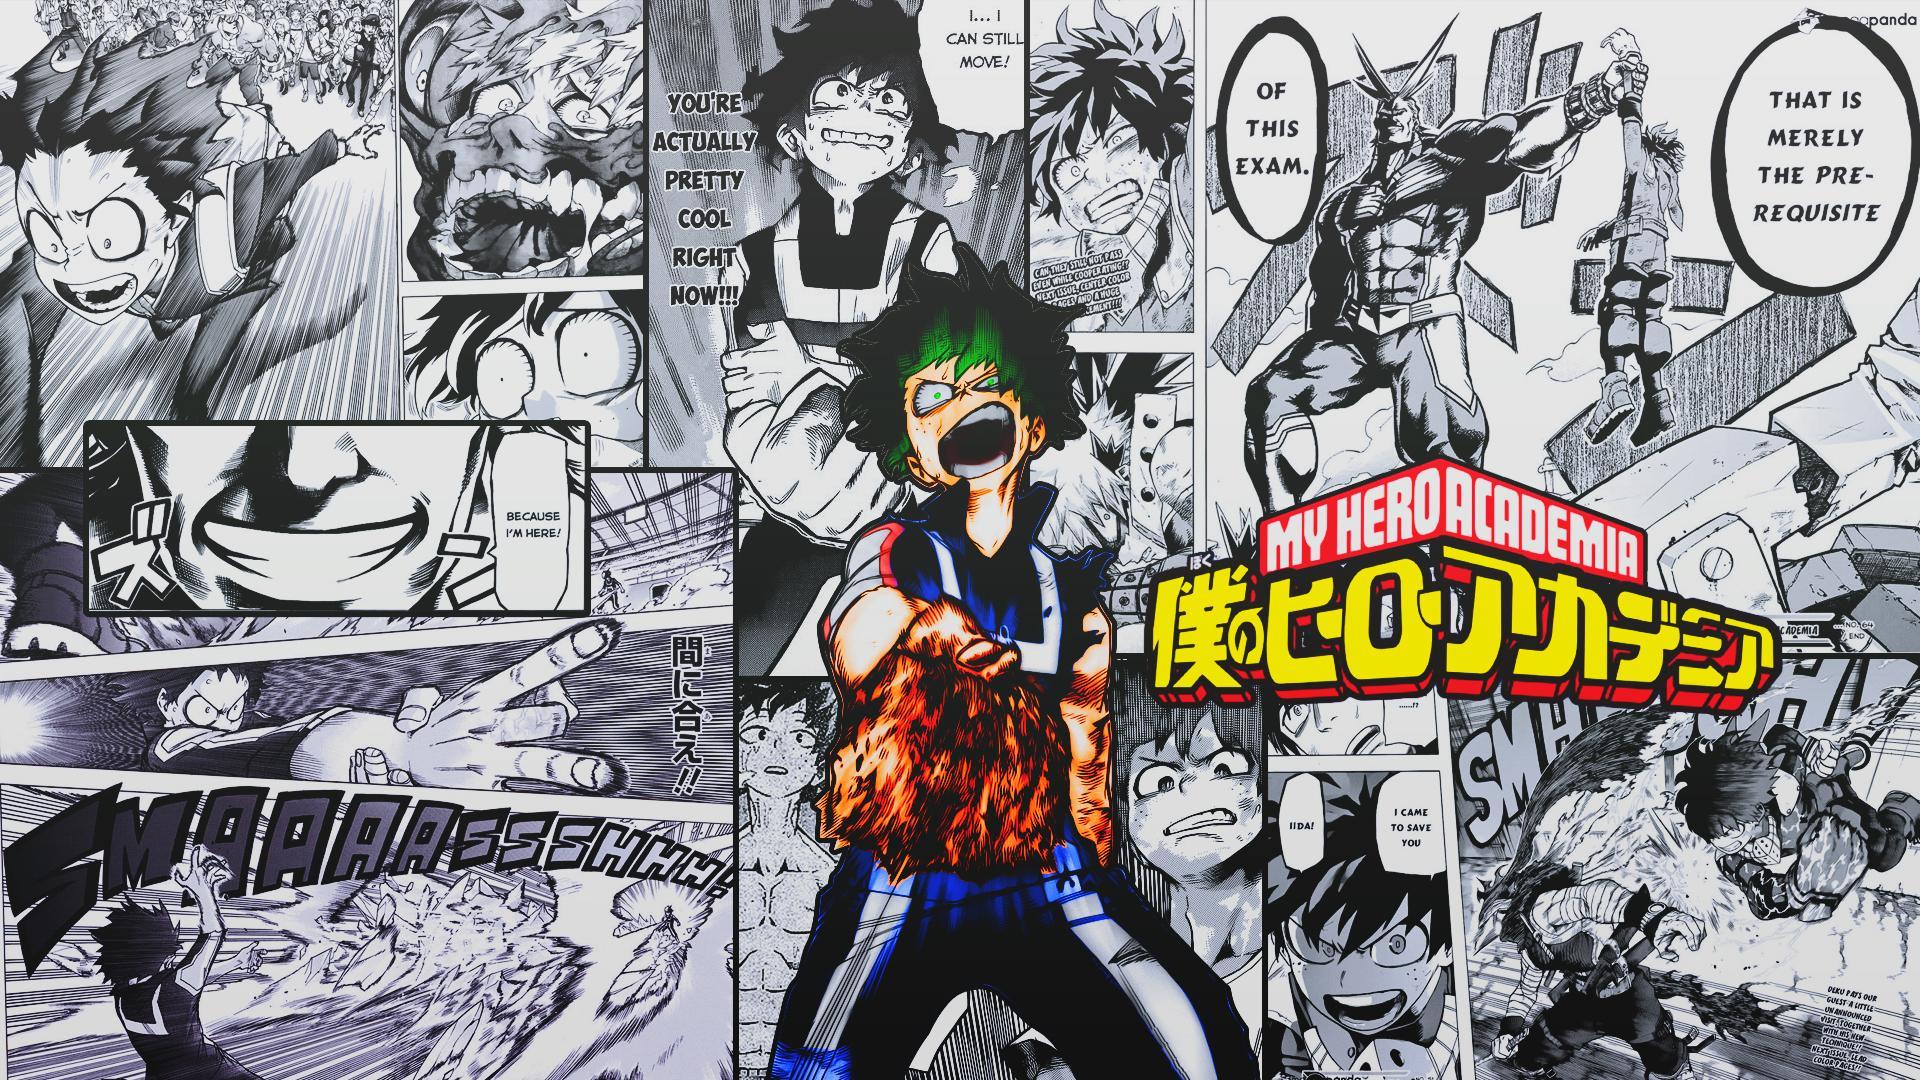 Download Wallpaper From Anime My Hero Academia With Hero Academia Desktop, Download Wallpaper